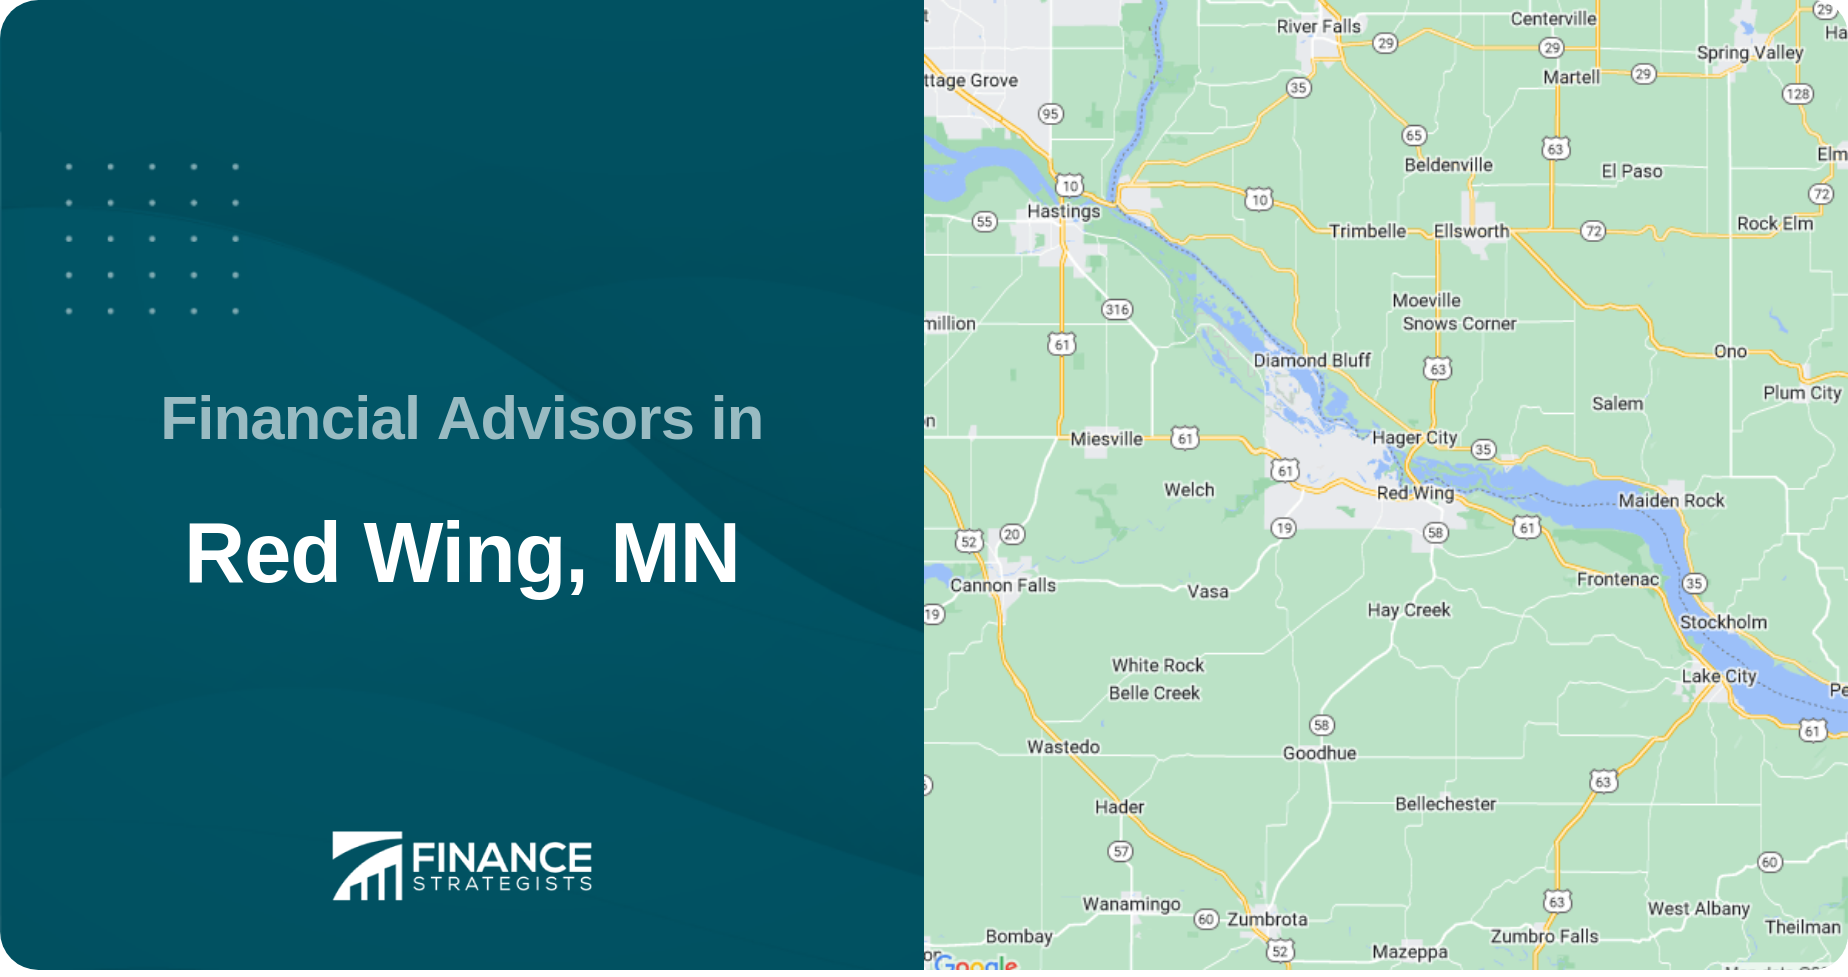 Financial Advisors in Red Wing, MN